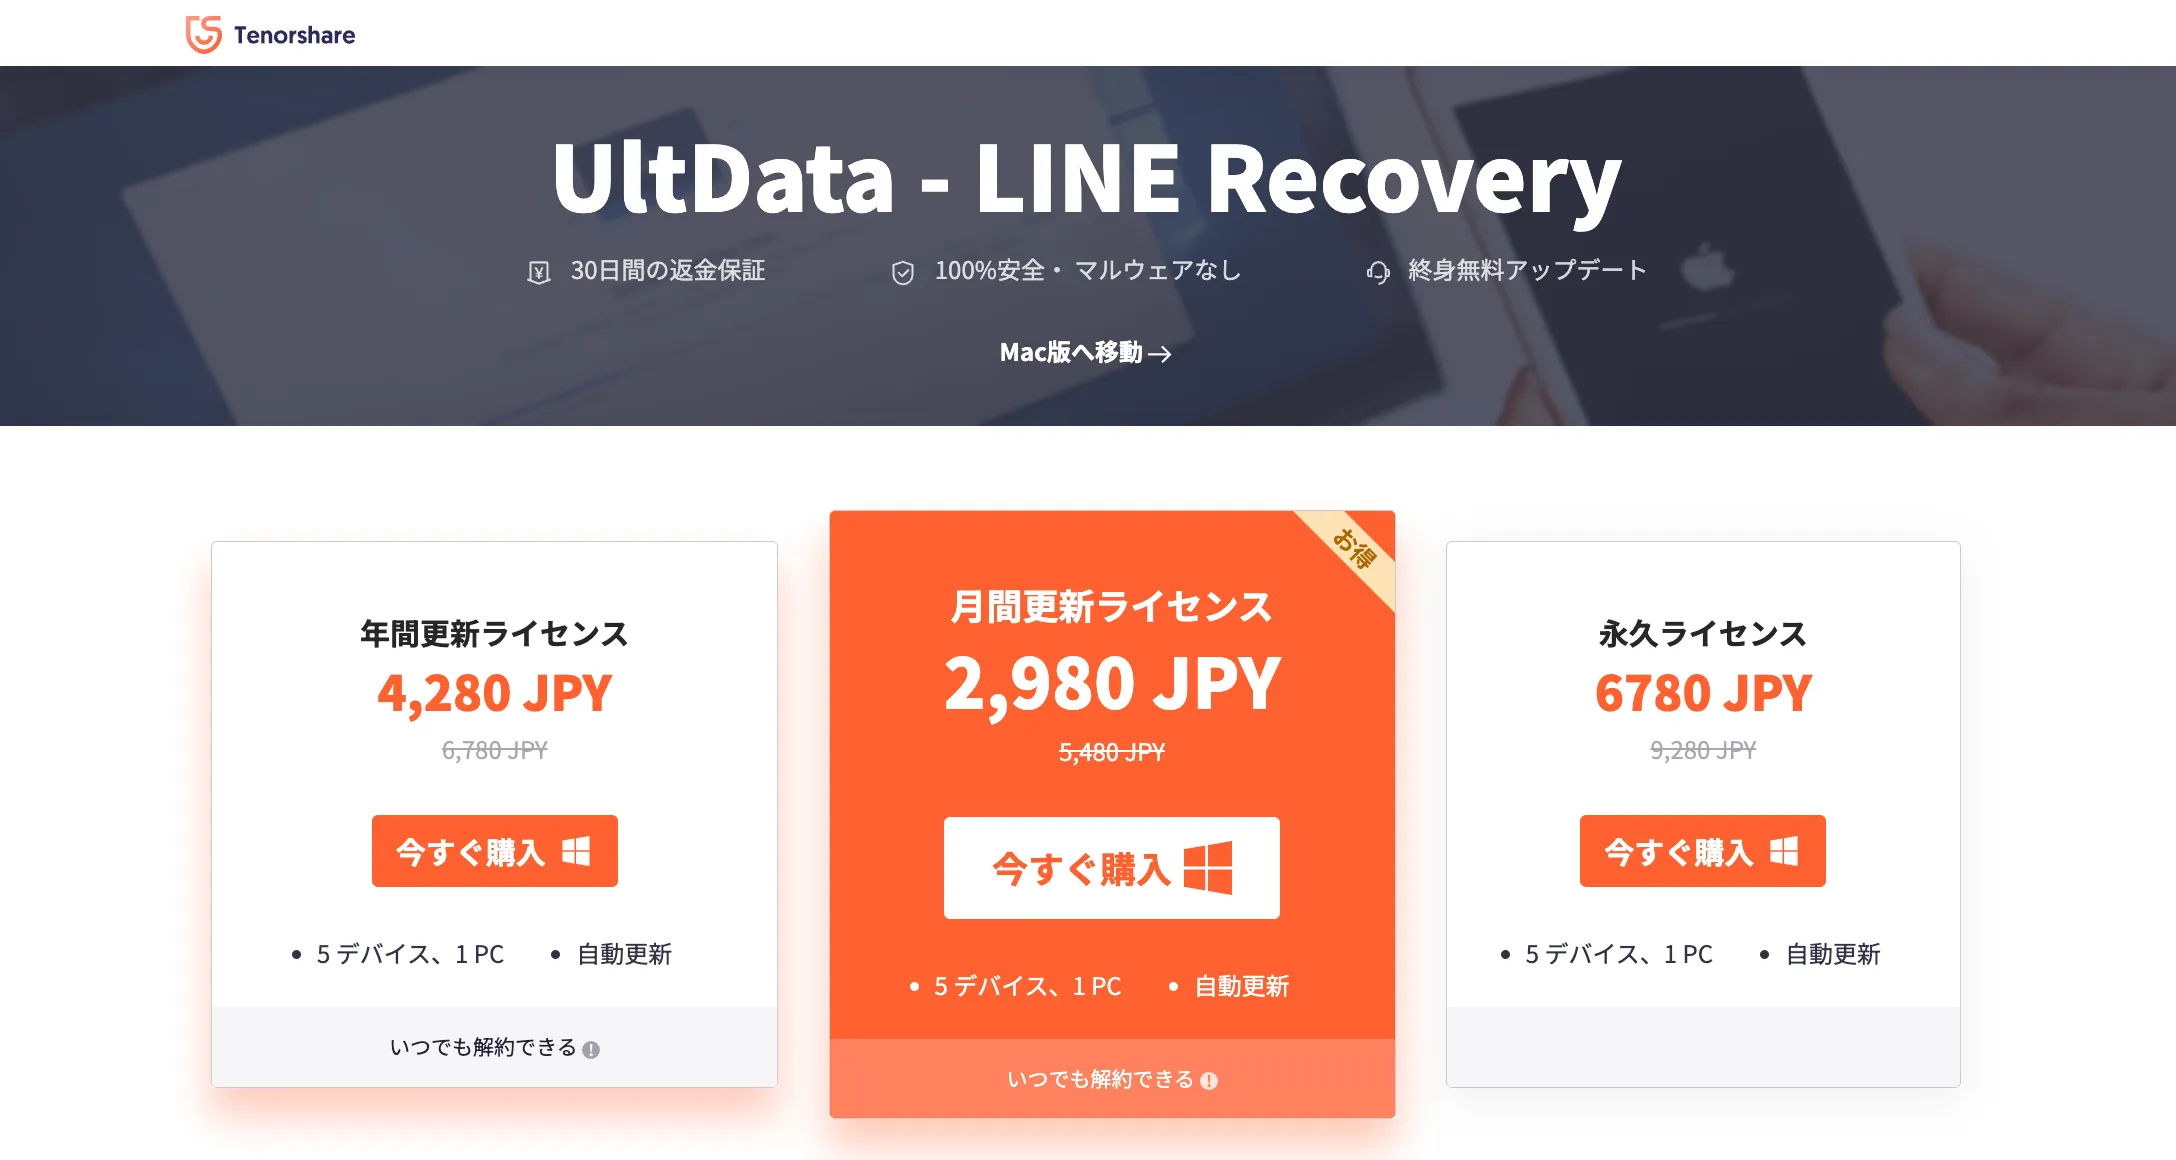 UltData LINE Recoveryセール